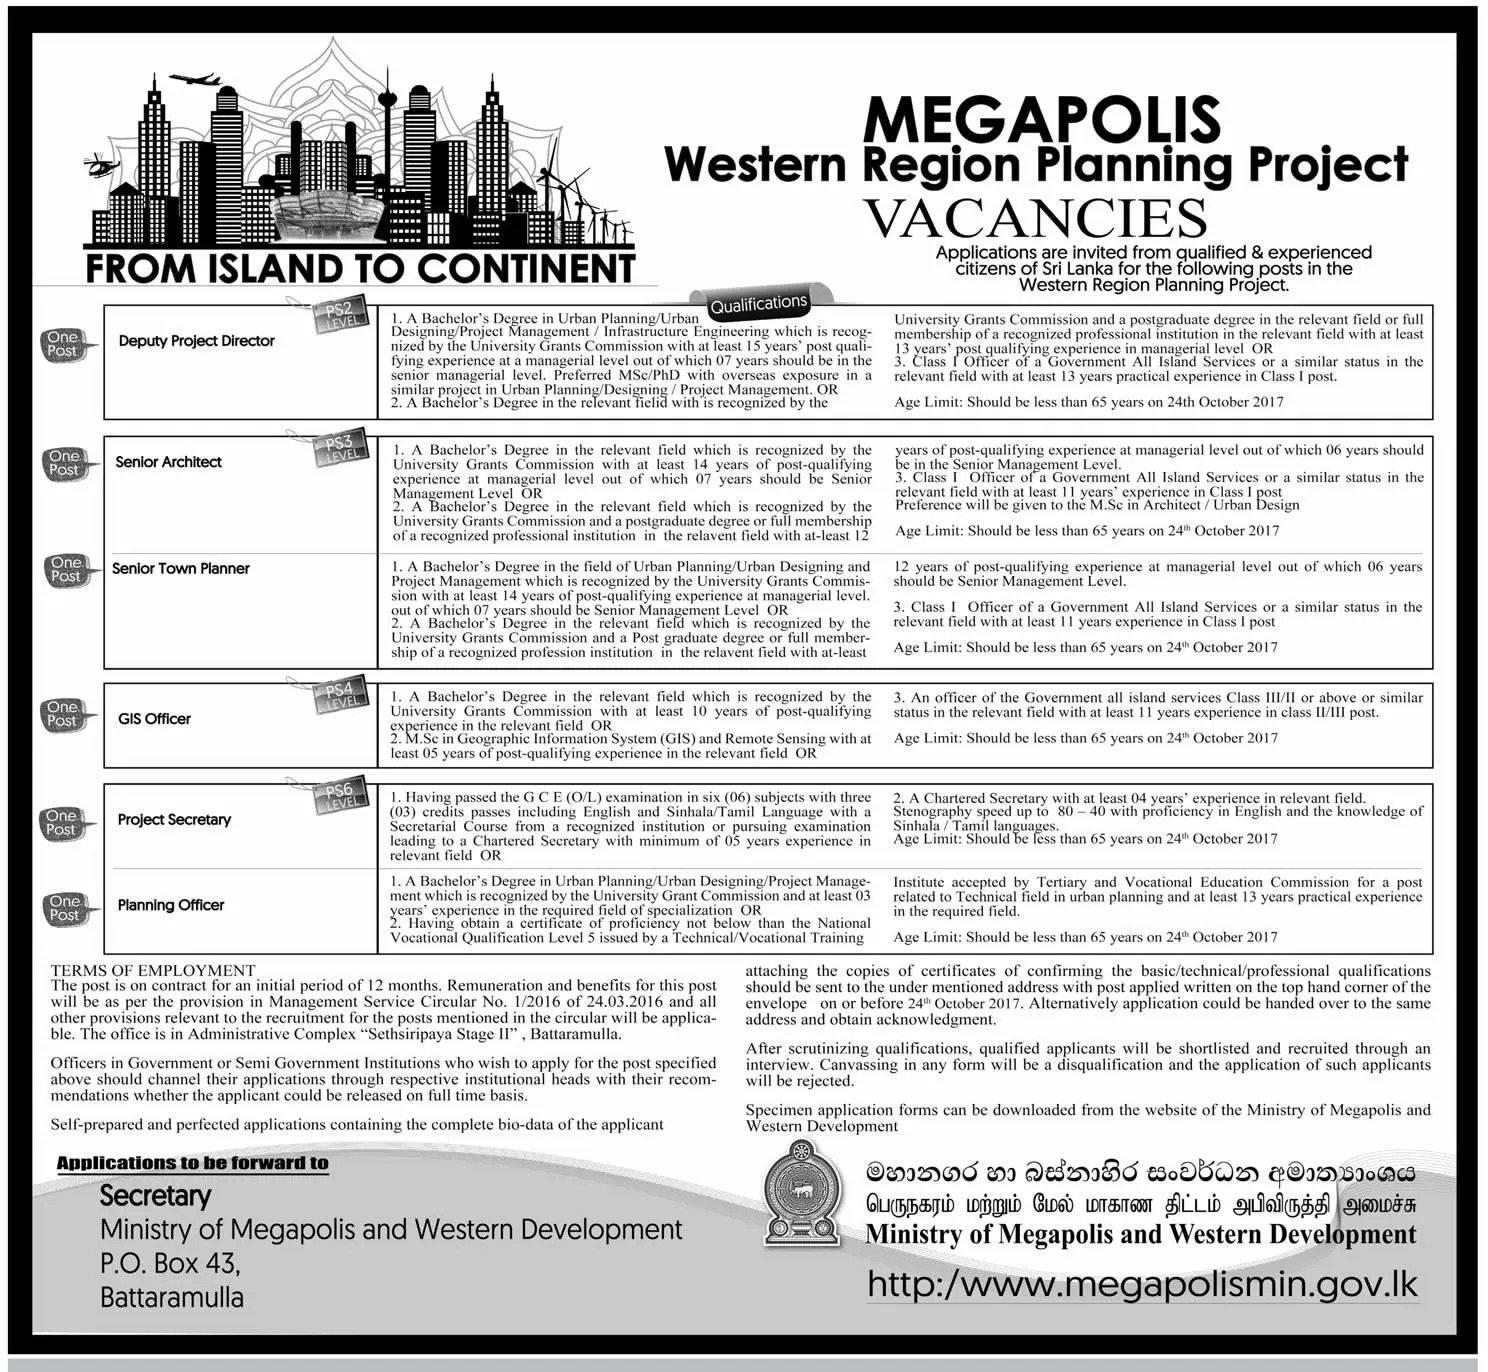 Ministry of Megapolis and Western Region Planning Vacancies